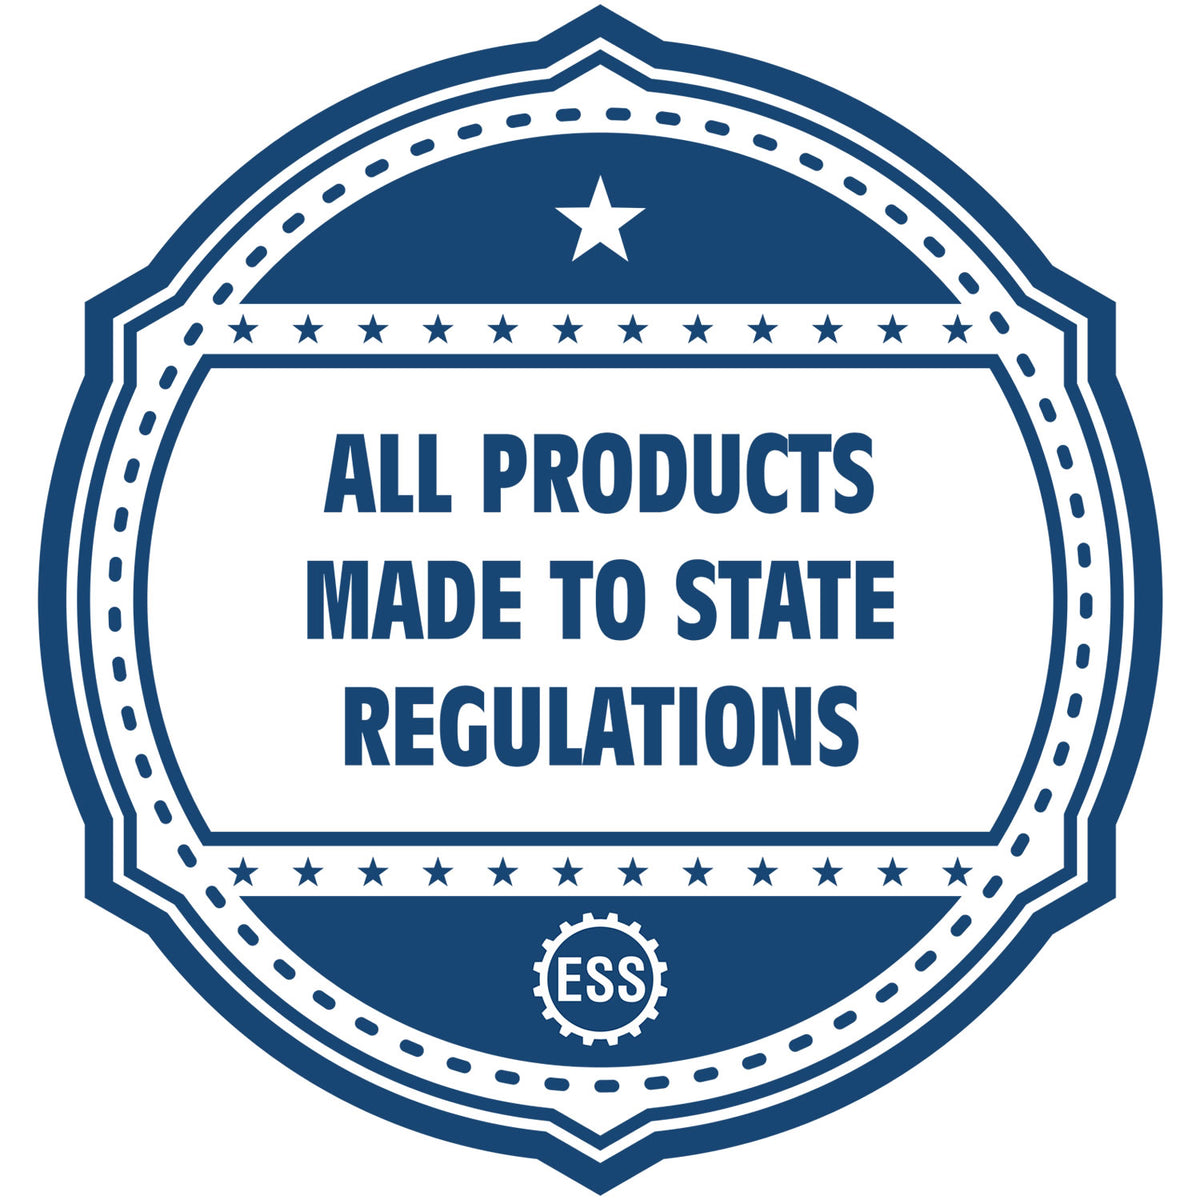 An icon or badge element for the Slim Pre-Inked Kentucky Landscape Architect Seal Stamp showing that this product is made in compliance with state regulations.